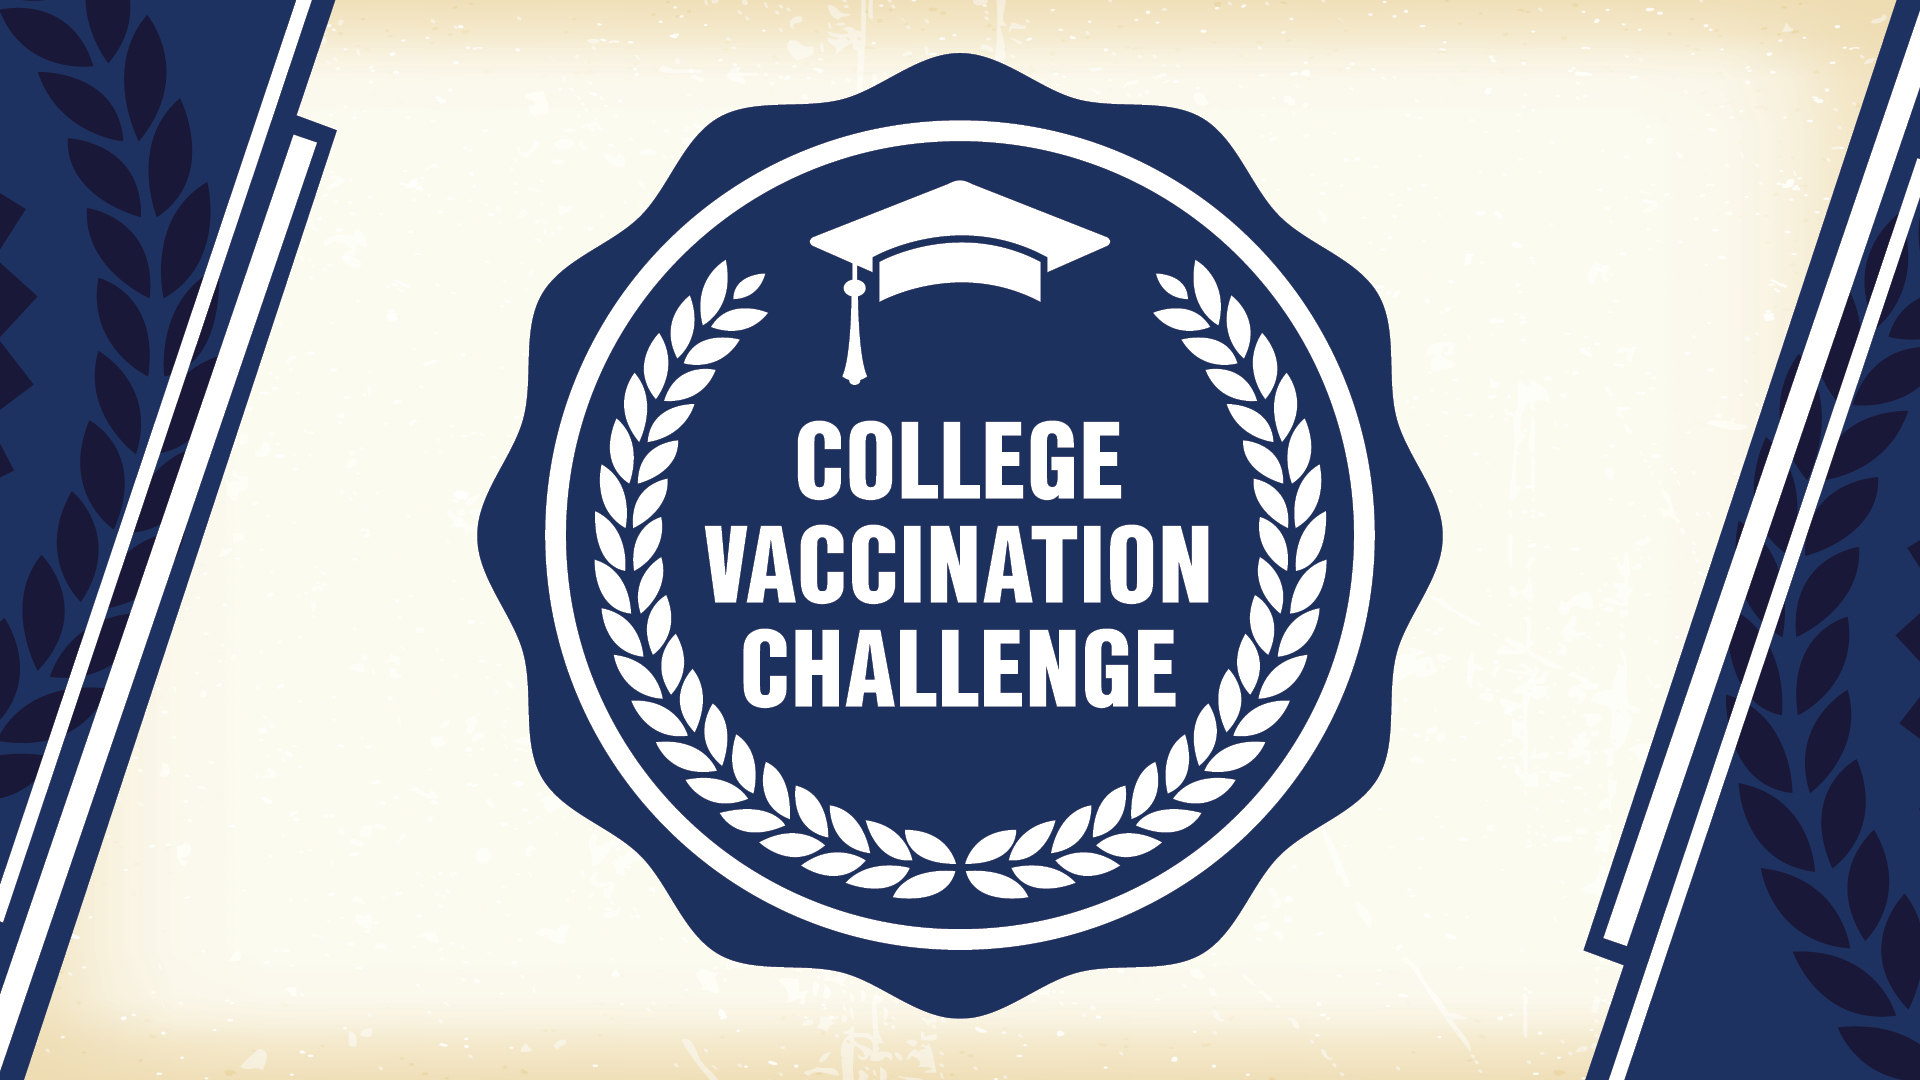 CMU Early Adopter of College Vaccine Challenge